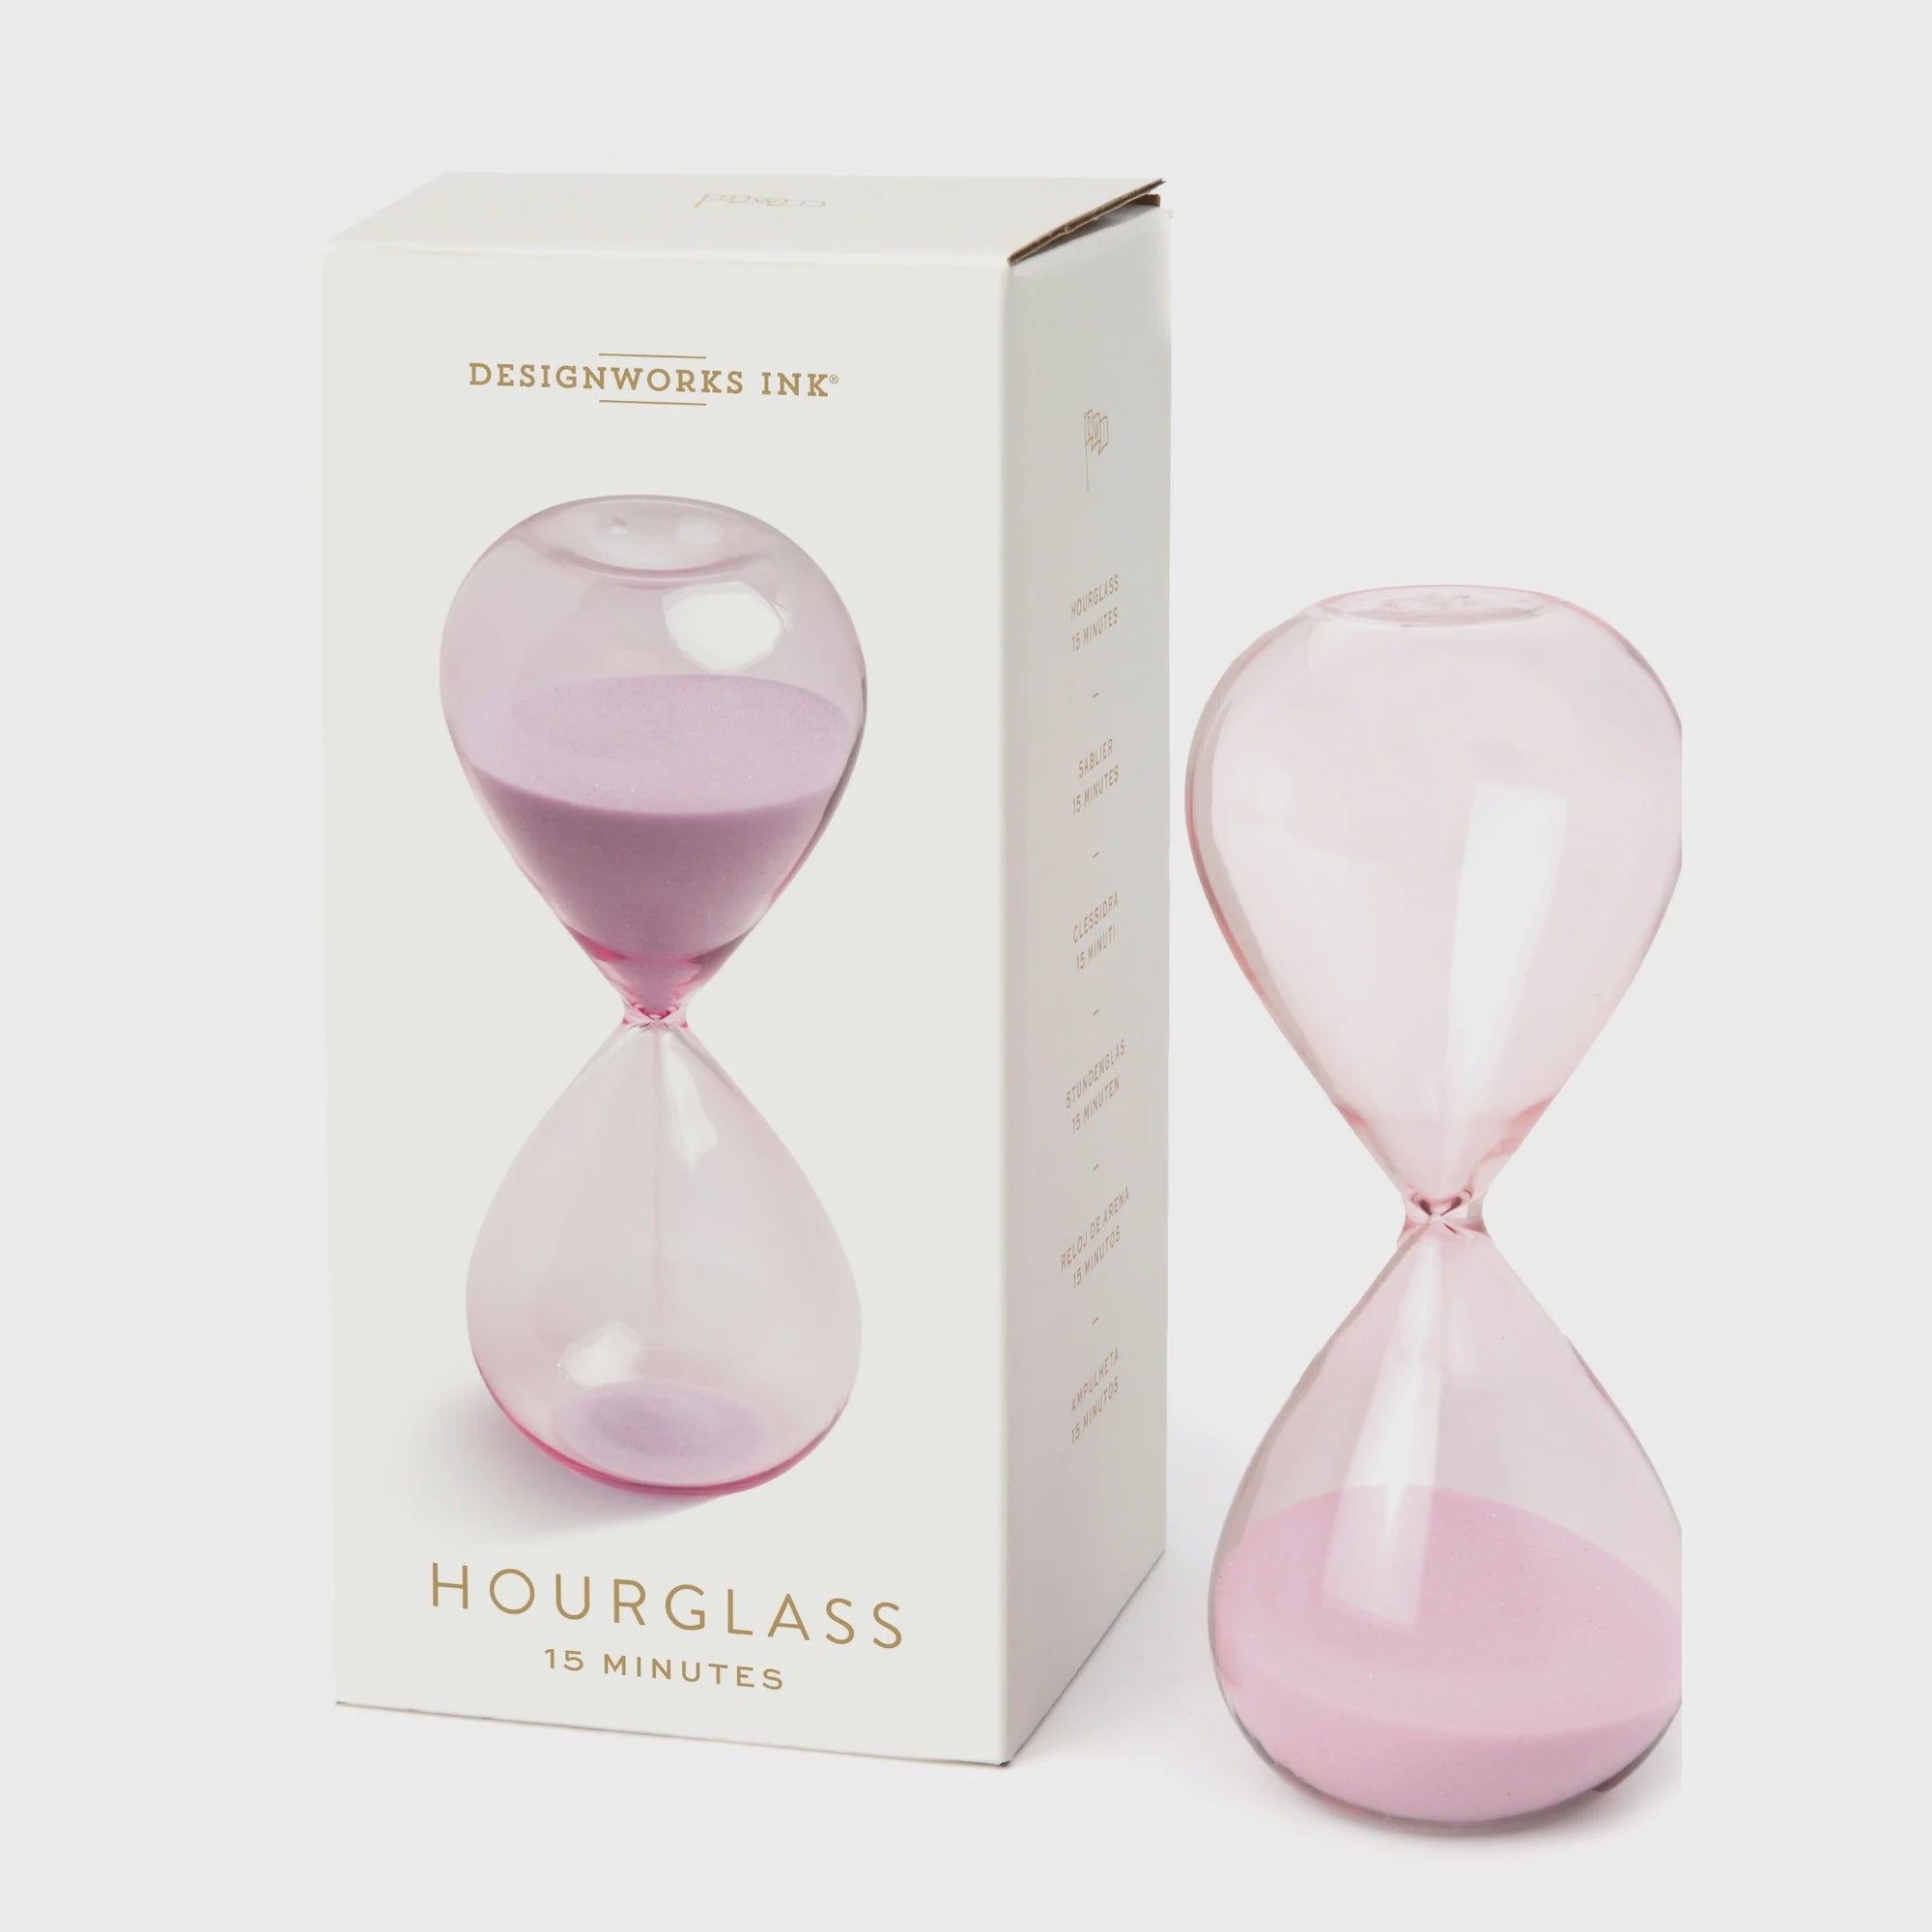 Designworks Ink Hourglass - Lilac 15 Minute